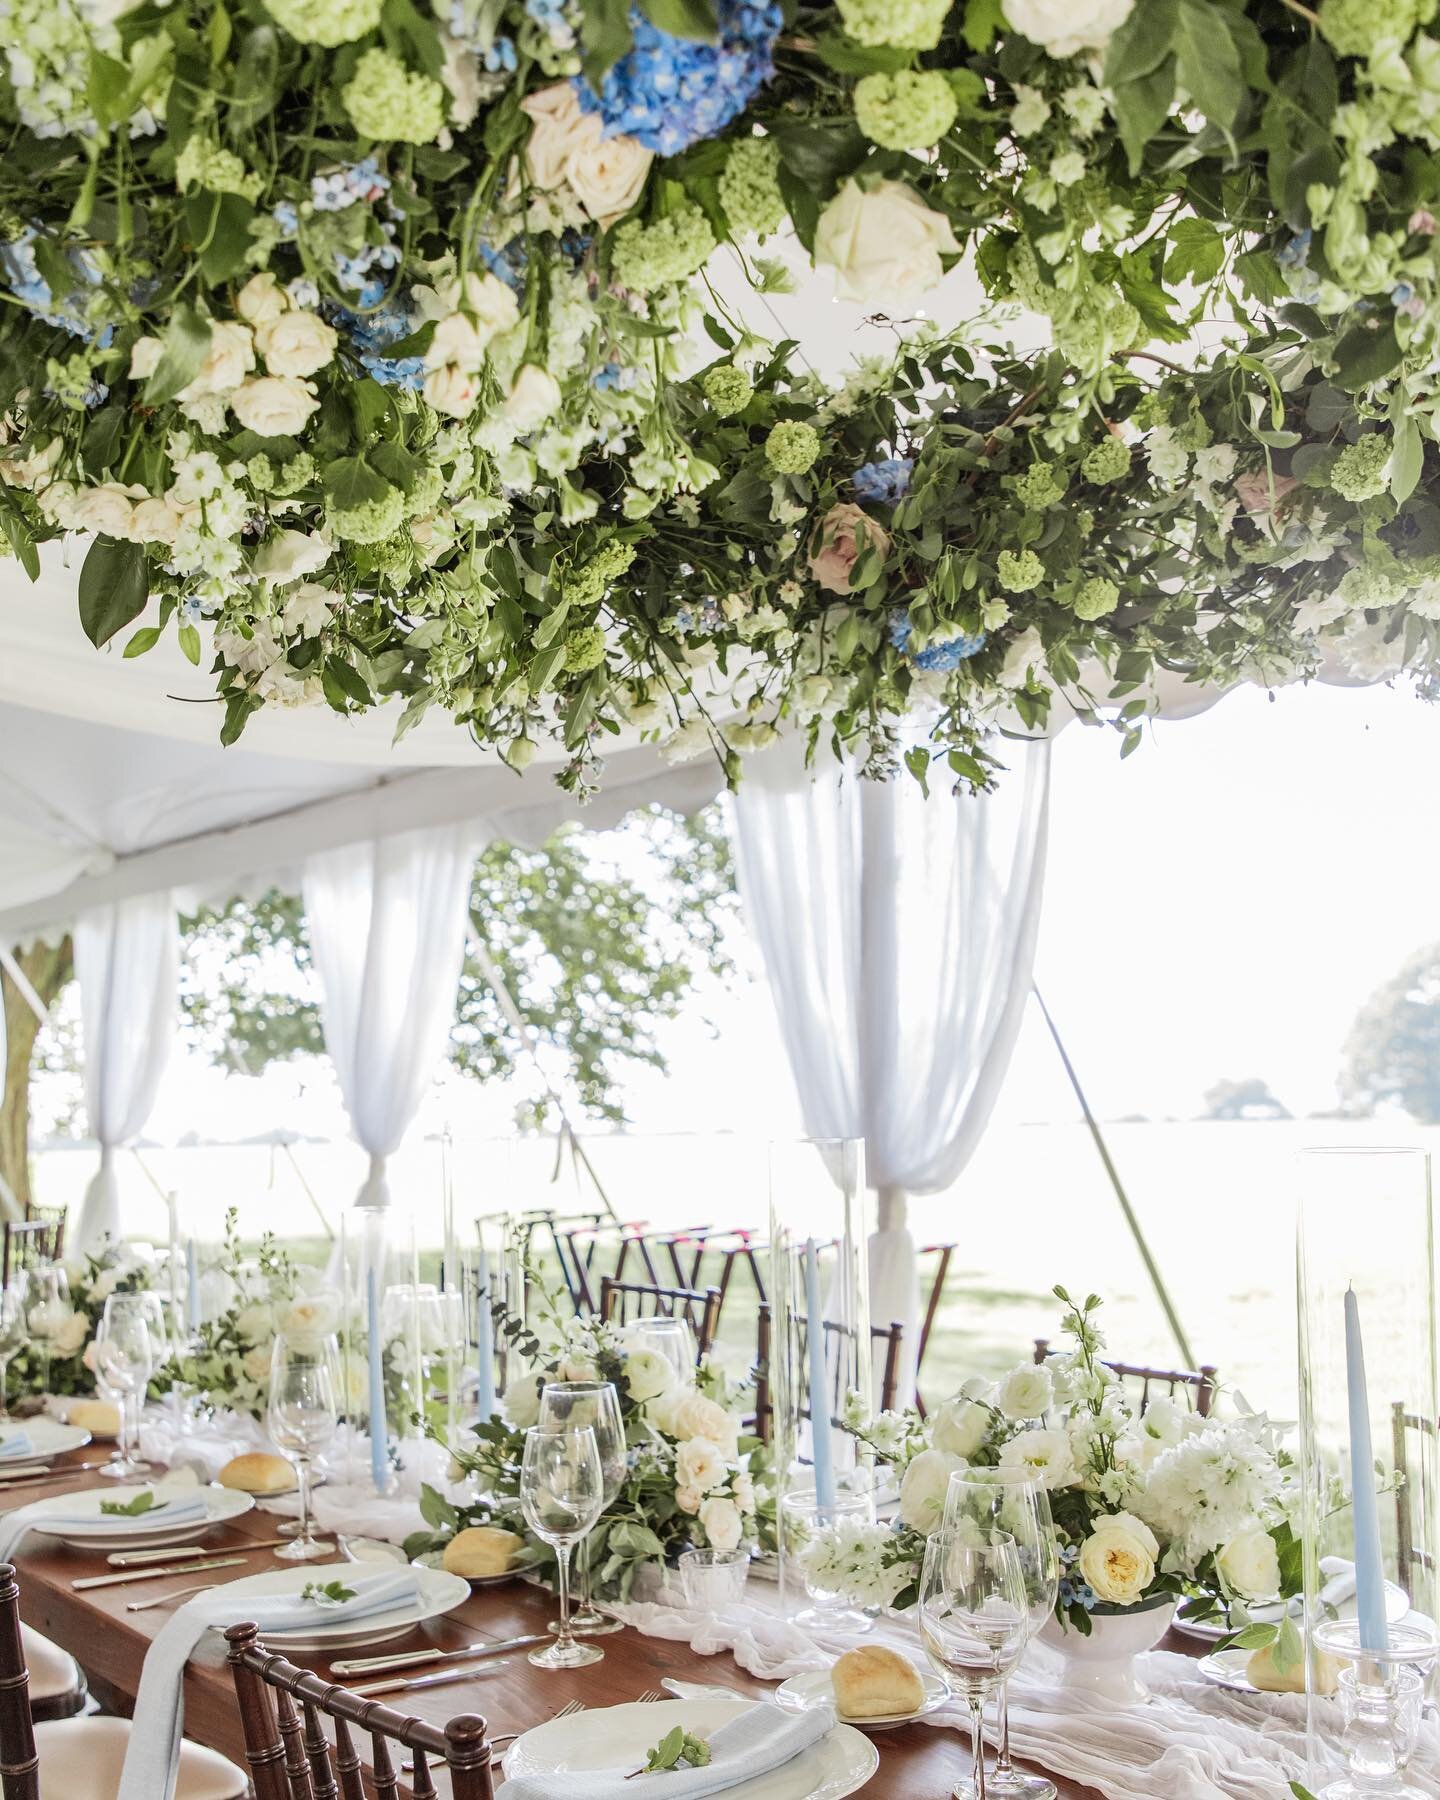 Showstopping head table to compliment sprawling garden and water views @blithewoldweddings @blithewold_mansion 

@lightwaveartists @kelsiezeliffosieja @blackstoneri @blithewold_mansion @blithewoldweddings @christinaflowerco